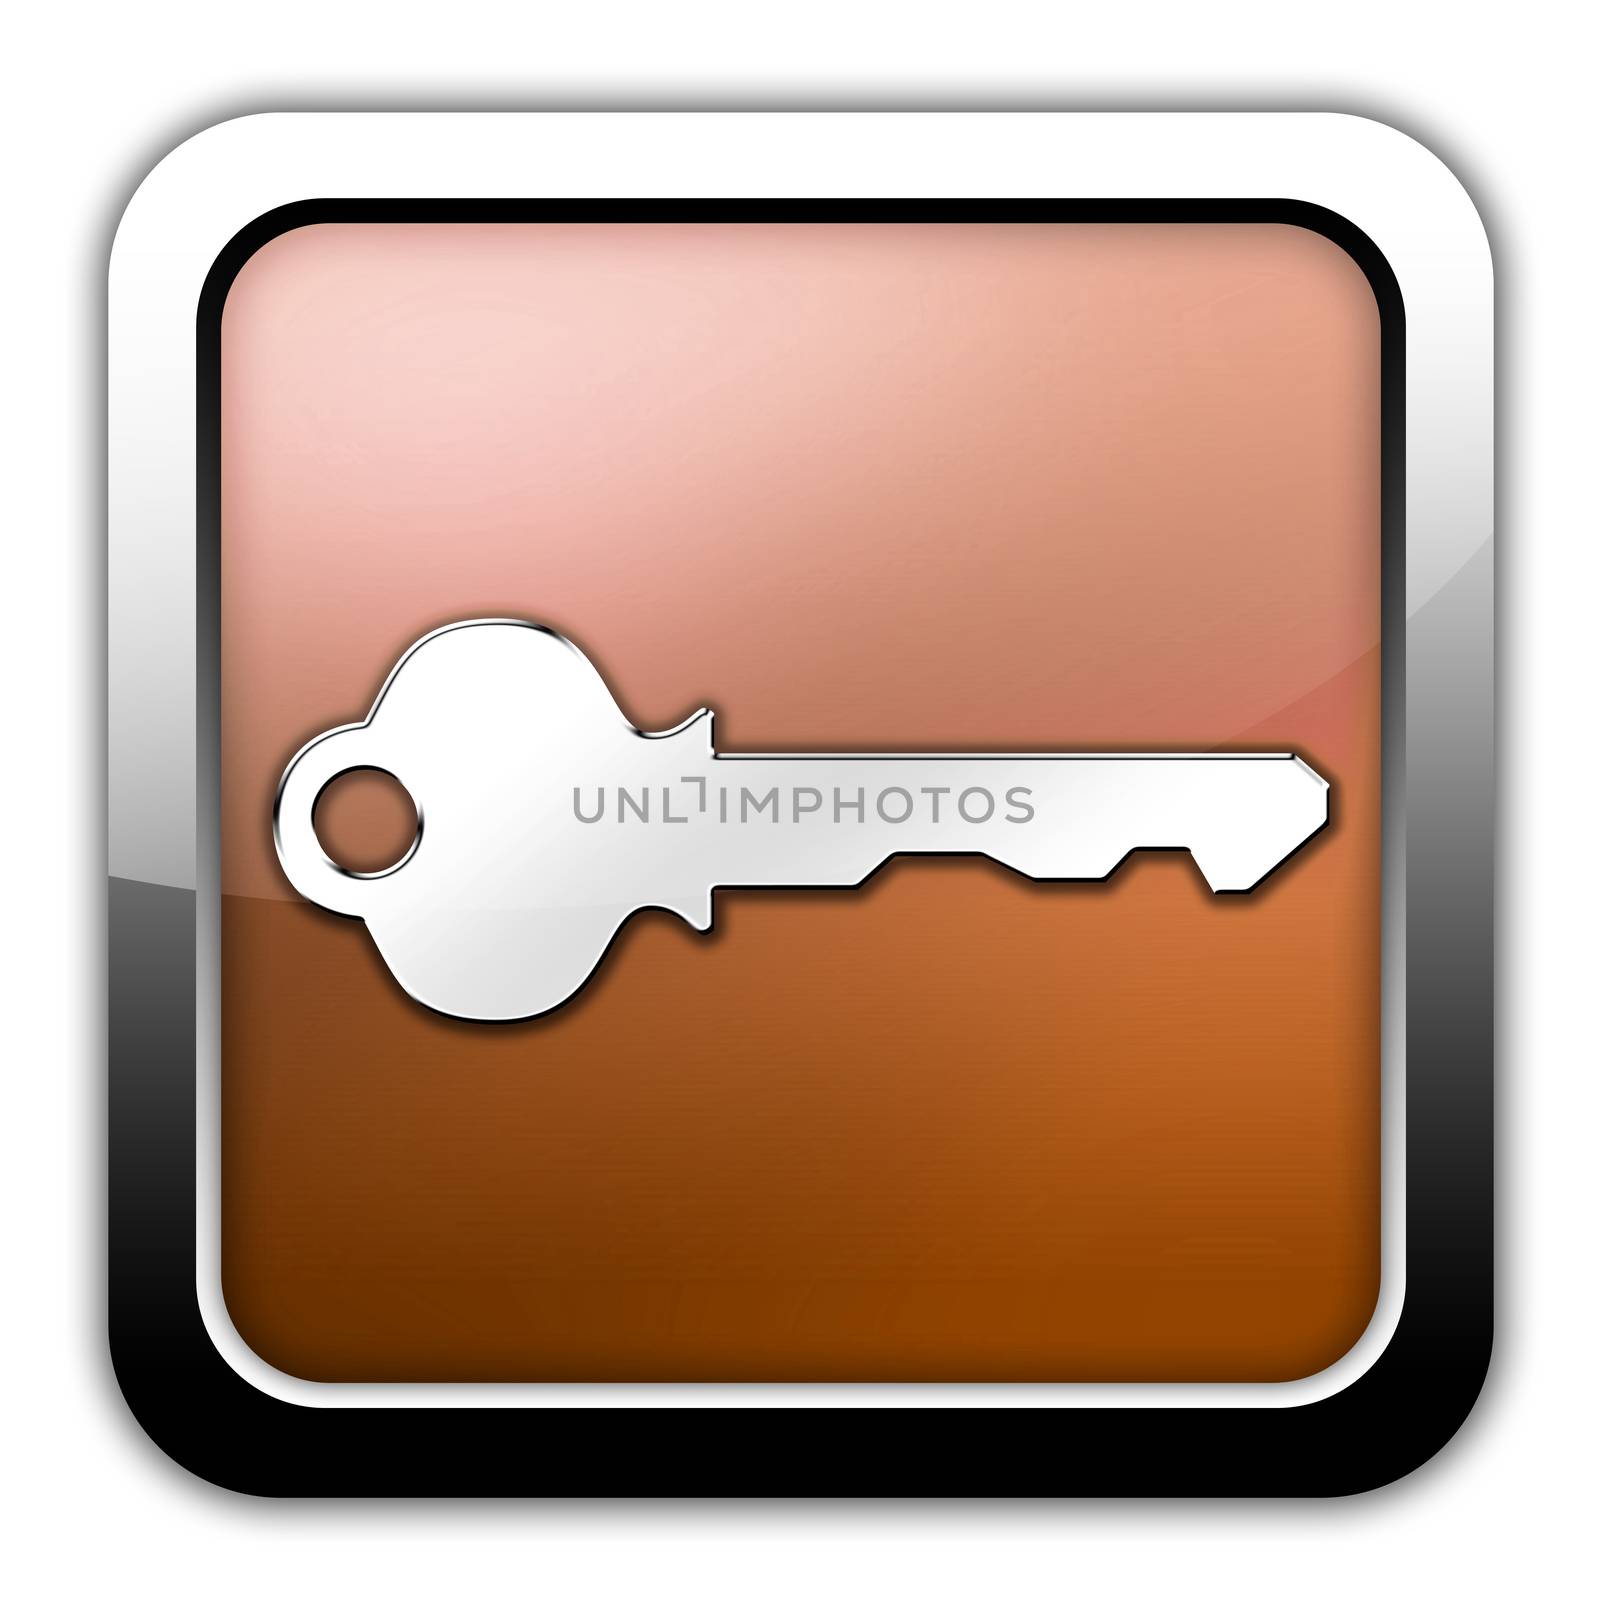 Icon, Button, Pictogram Key by mindscanner